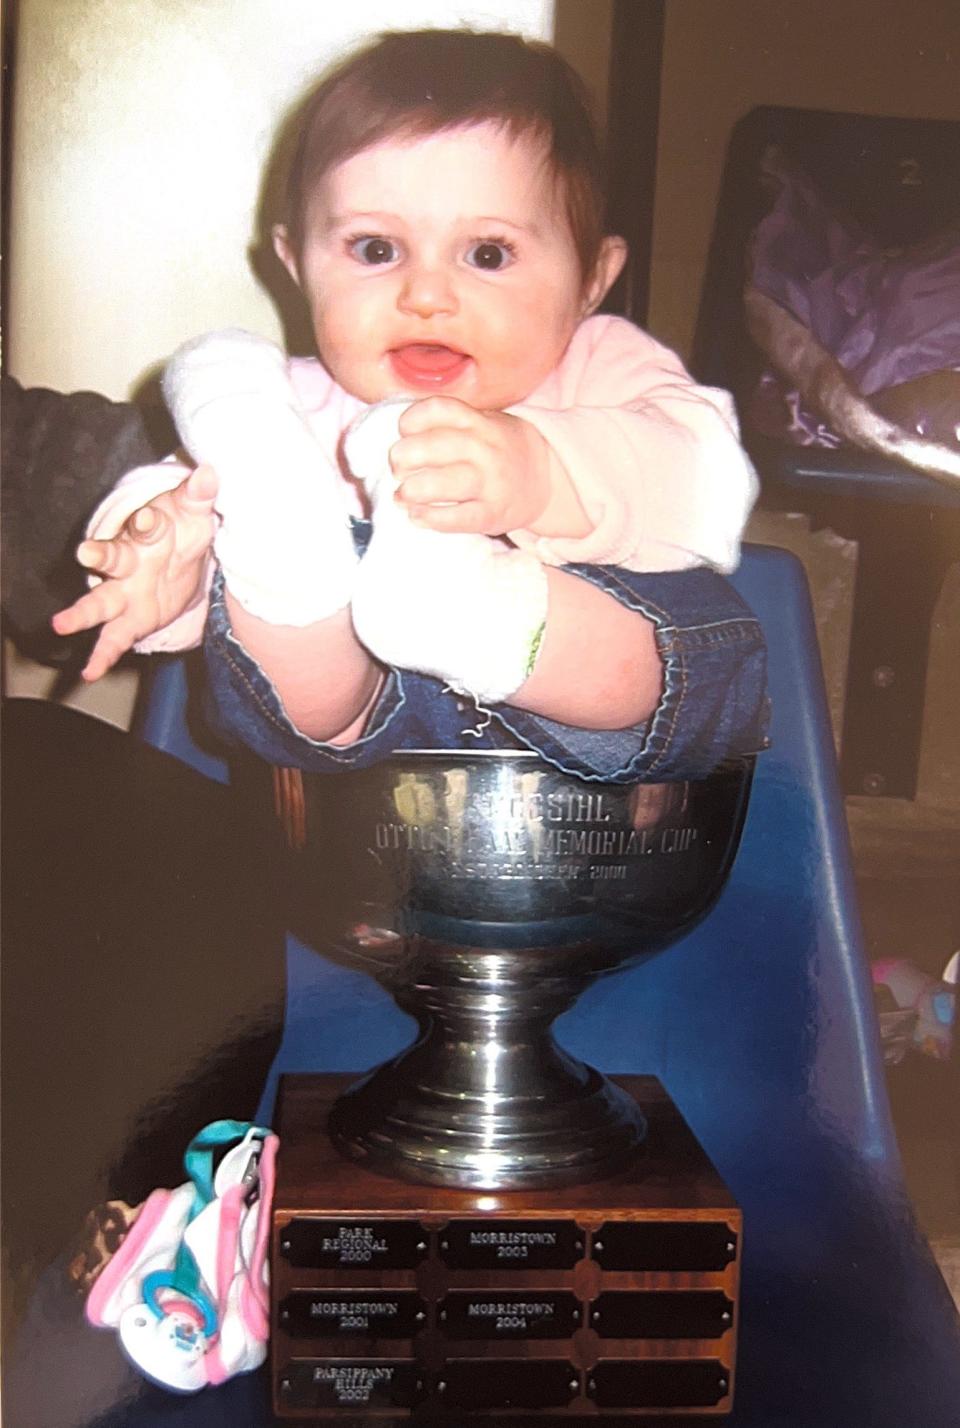 Samantha Levis poses in the 2005 Haas Cup, which her father Tom Levis won as coach of Park Regional. She is now a freshman at the University of Delaware.